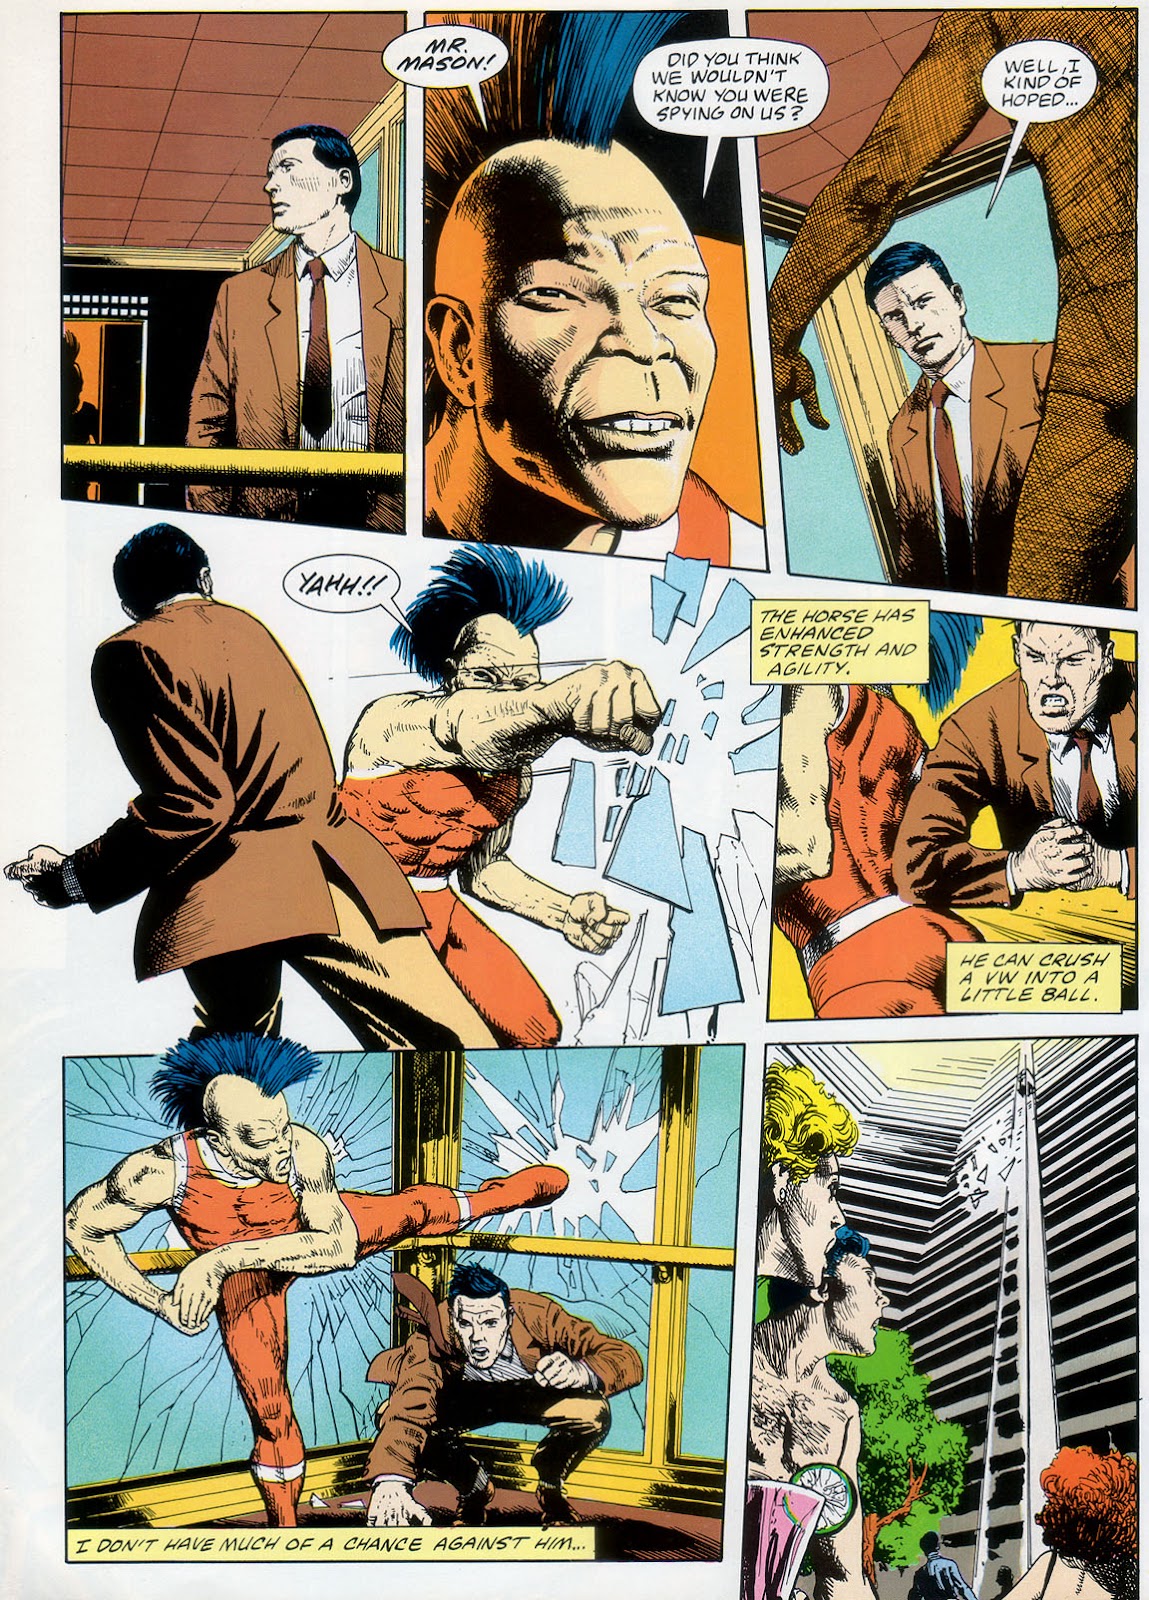 Marvel Graphic Novel issue 57 - Rick Mason - The Agent - Page 14